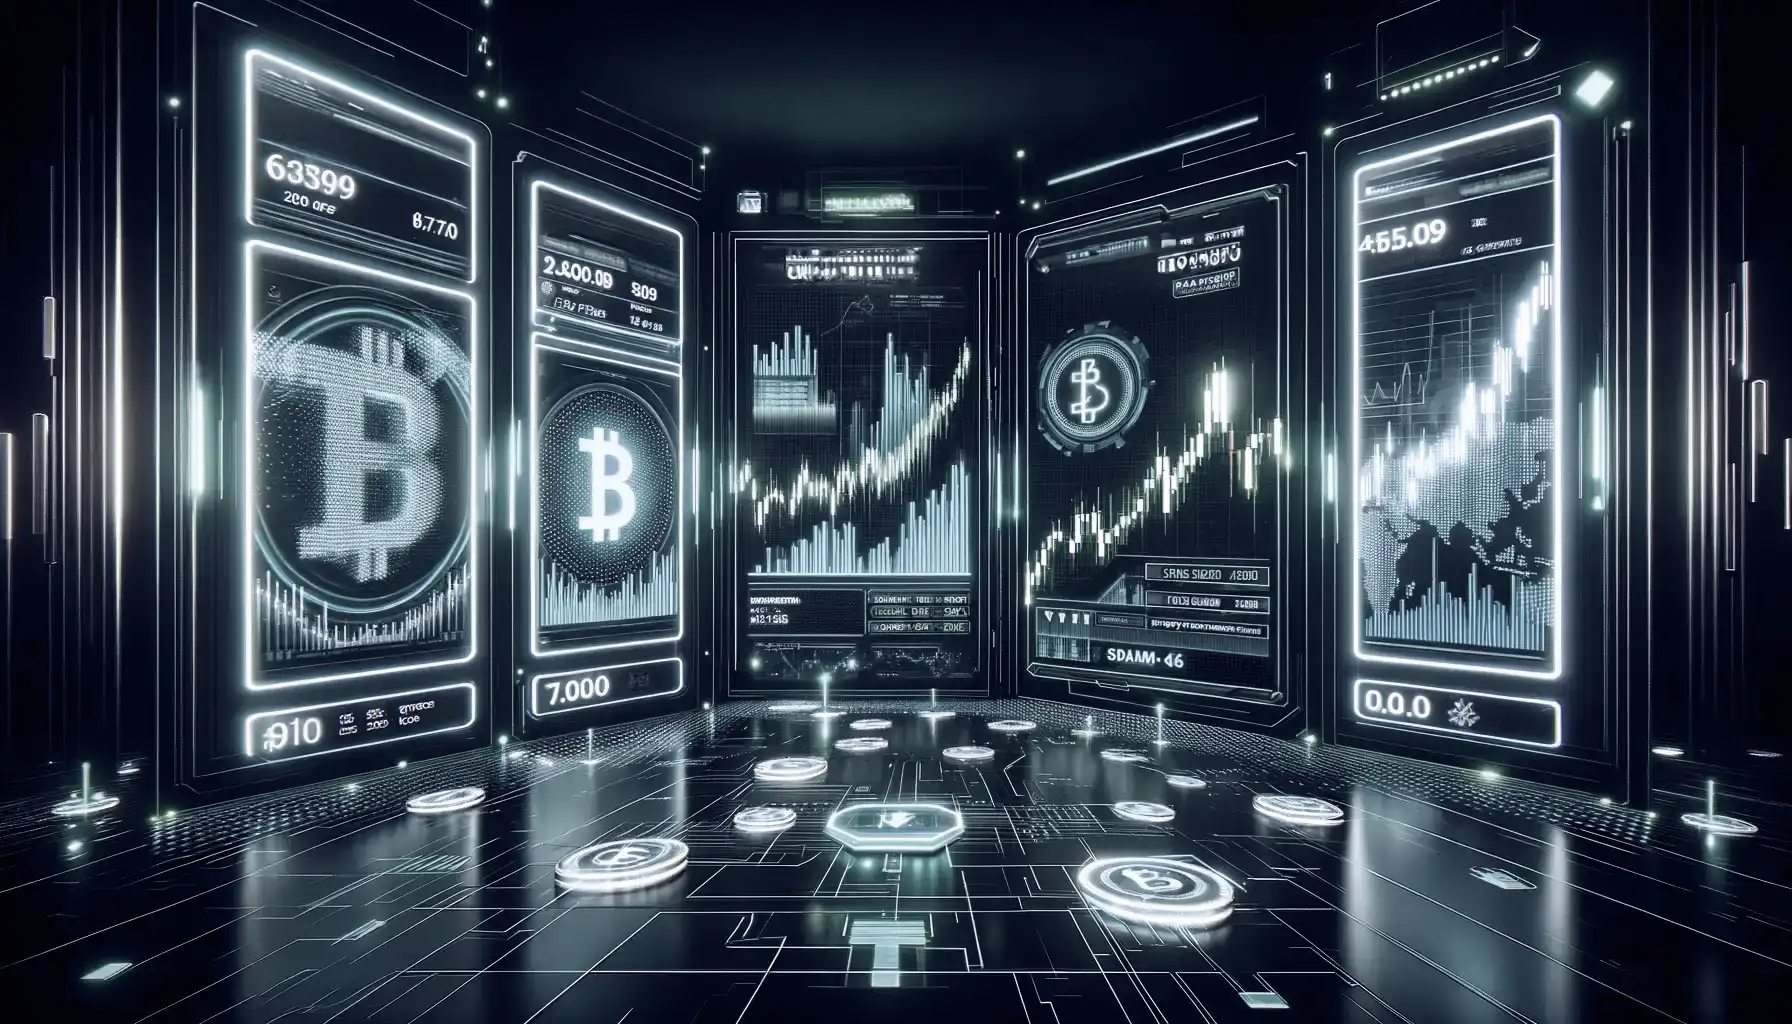 This image is designed to visually explain the concept of both large and small-sized cryptocurrency trades for a website. It depicts a high-tech trading environment, resembling a stock market chart, to emphasize the trading of top cryptocurrencies. The scene features digital screens or panels that display cryptocurrency trading graphs and data, all illuminated in striking neon green. These screens highlight the use of advanced order routing sources to secure the best market prices with minimal counterparty risks. The overall design underscores the advanced technology and security inherent in cryptocurrency trading, focusing on the supportive services provided by a client support team. The consistent use of neon green lights and colors throughout the image creates a cohesive and visually appealing theme, reflecting the innovative and dynamic nature of cryptocurrency trading.